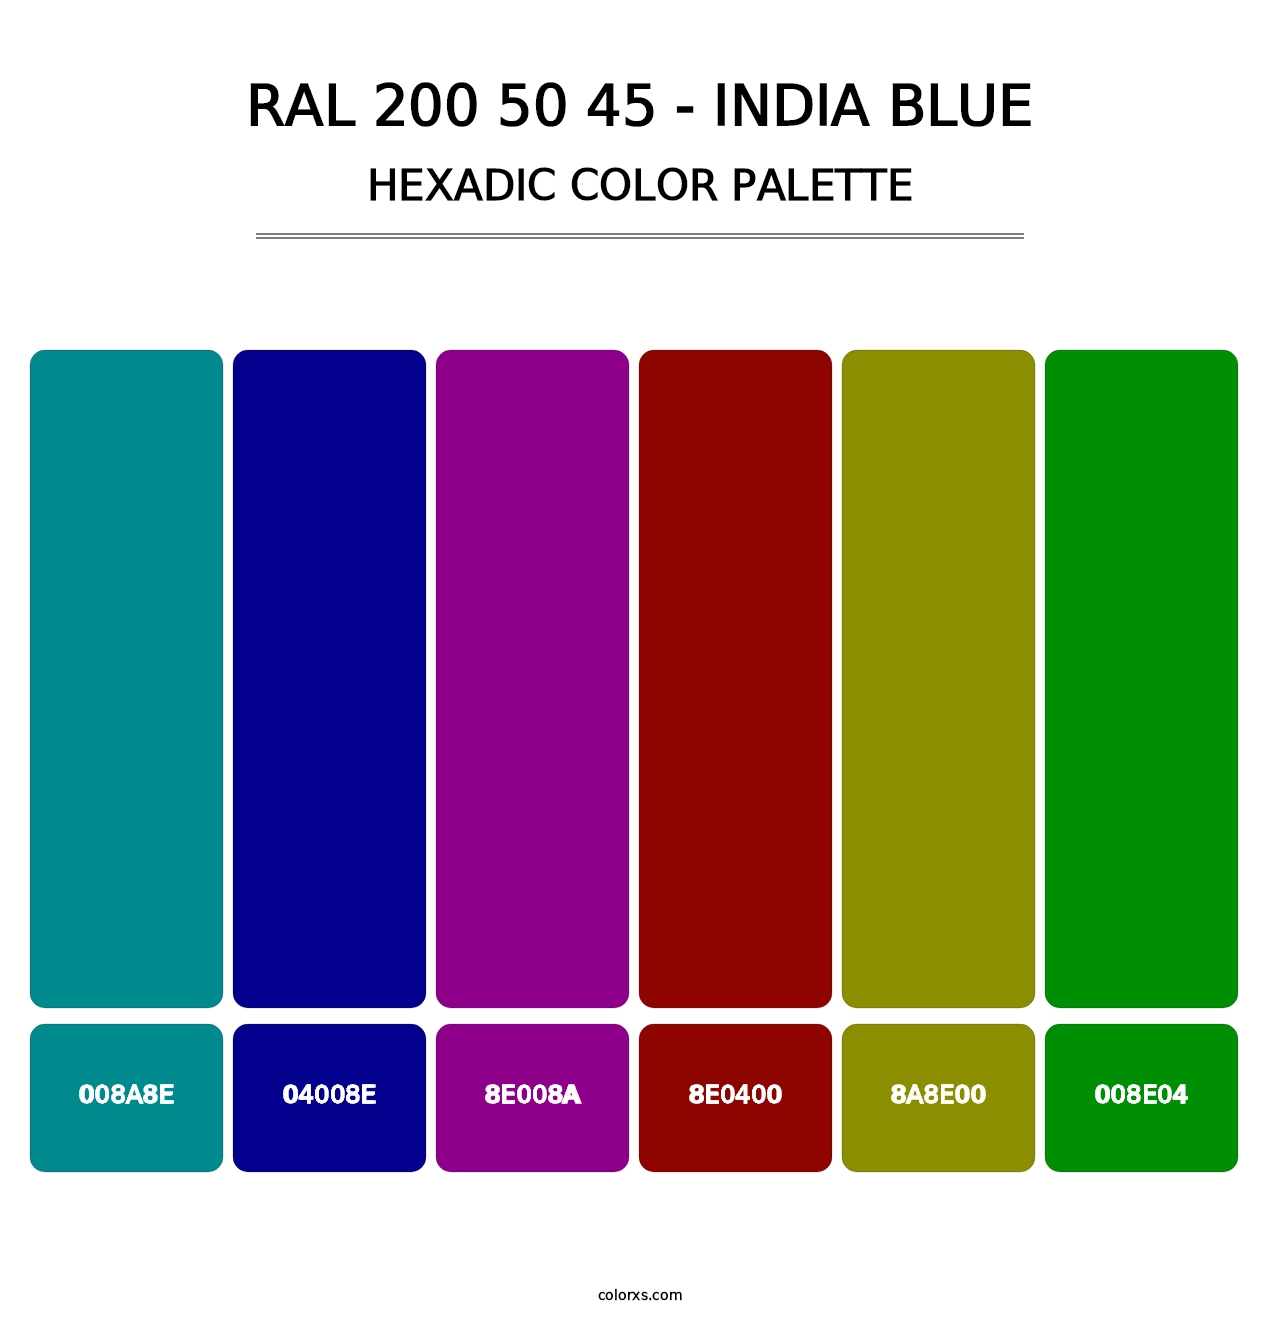 RAL 200 50 45 - India Blue - Hexadic Color Palette